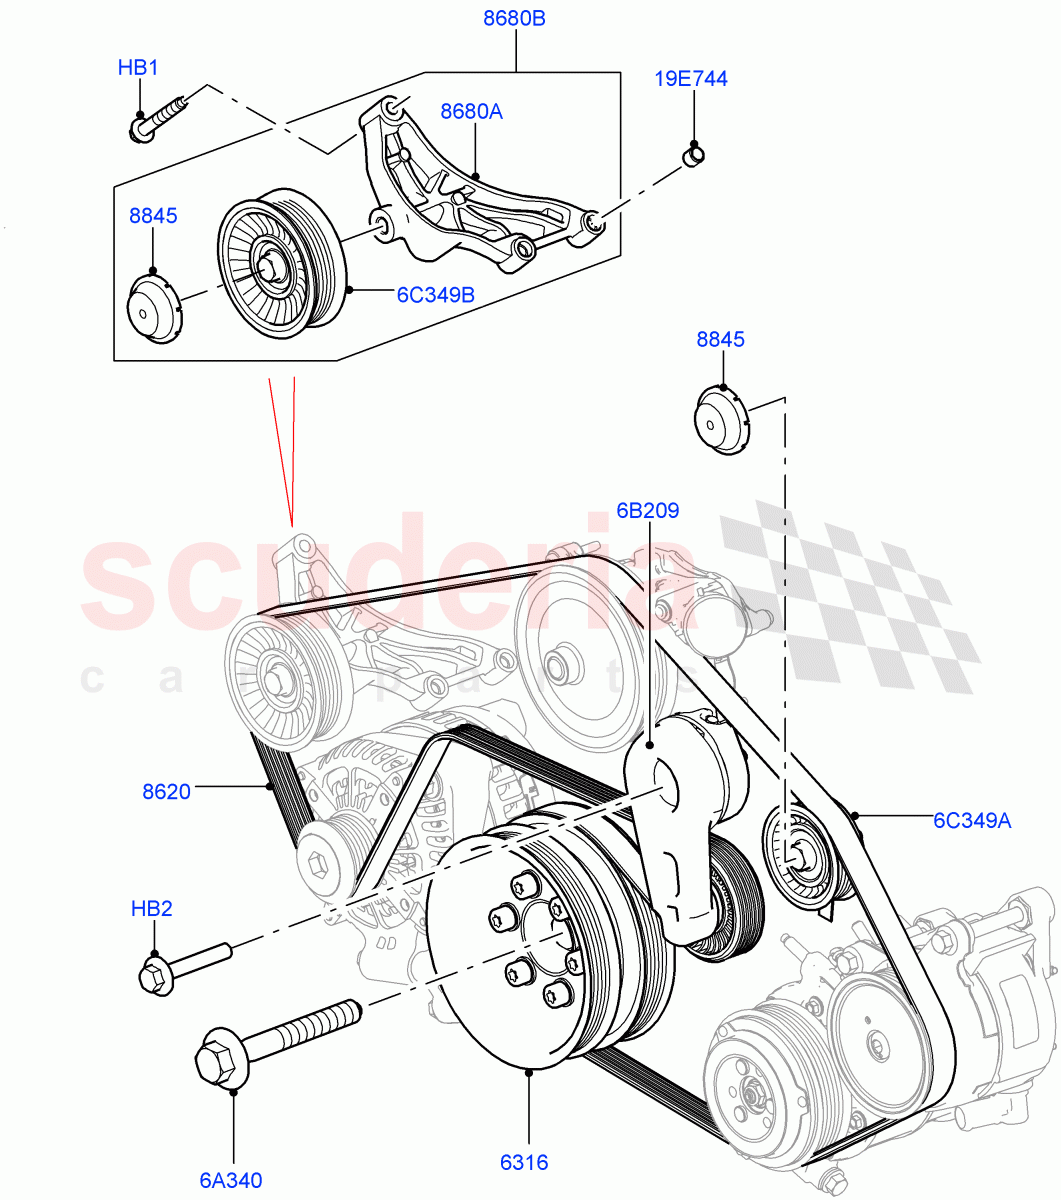 Pulleys And Drive Belts(Primary Drive)(5.0L P AJ133 DOHC CDA S/C Enhanced,Electronic Air Suspension With ACE,5.0 Petrol AJ133 DOHC CDA,Sport Suspension w/ARC)((V)FROMKA000001) of Land Rover Land Rover Range Rover Sport (2014+) [5.0 OHC SGDI SC V8 Petrol]